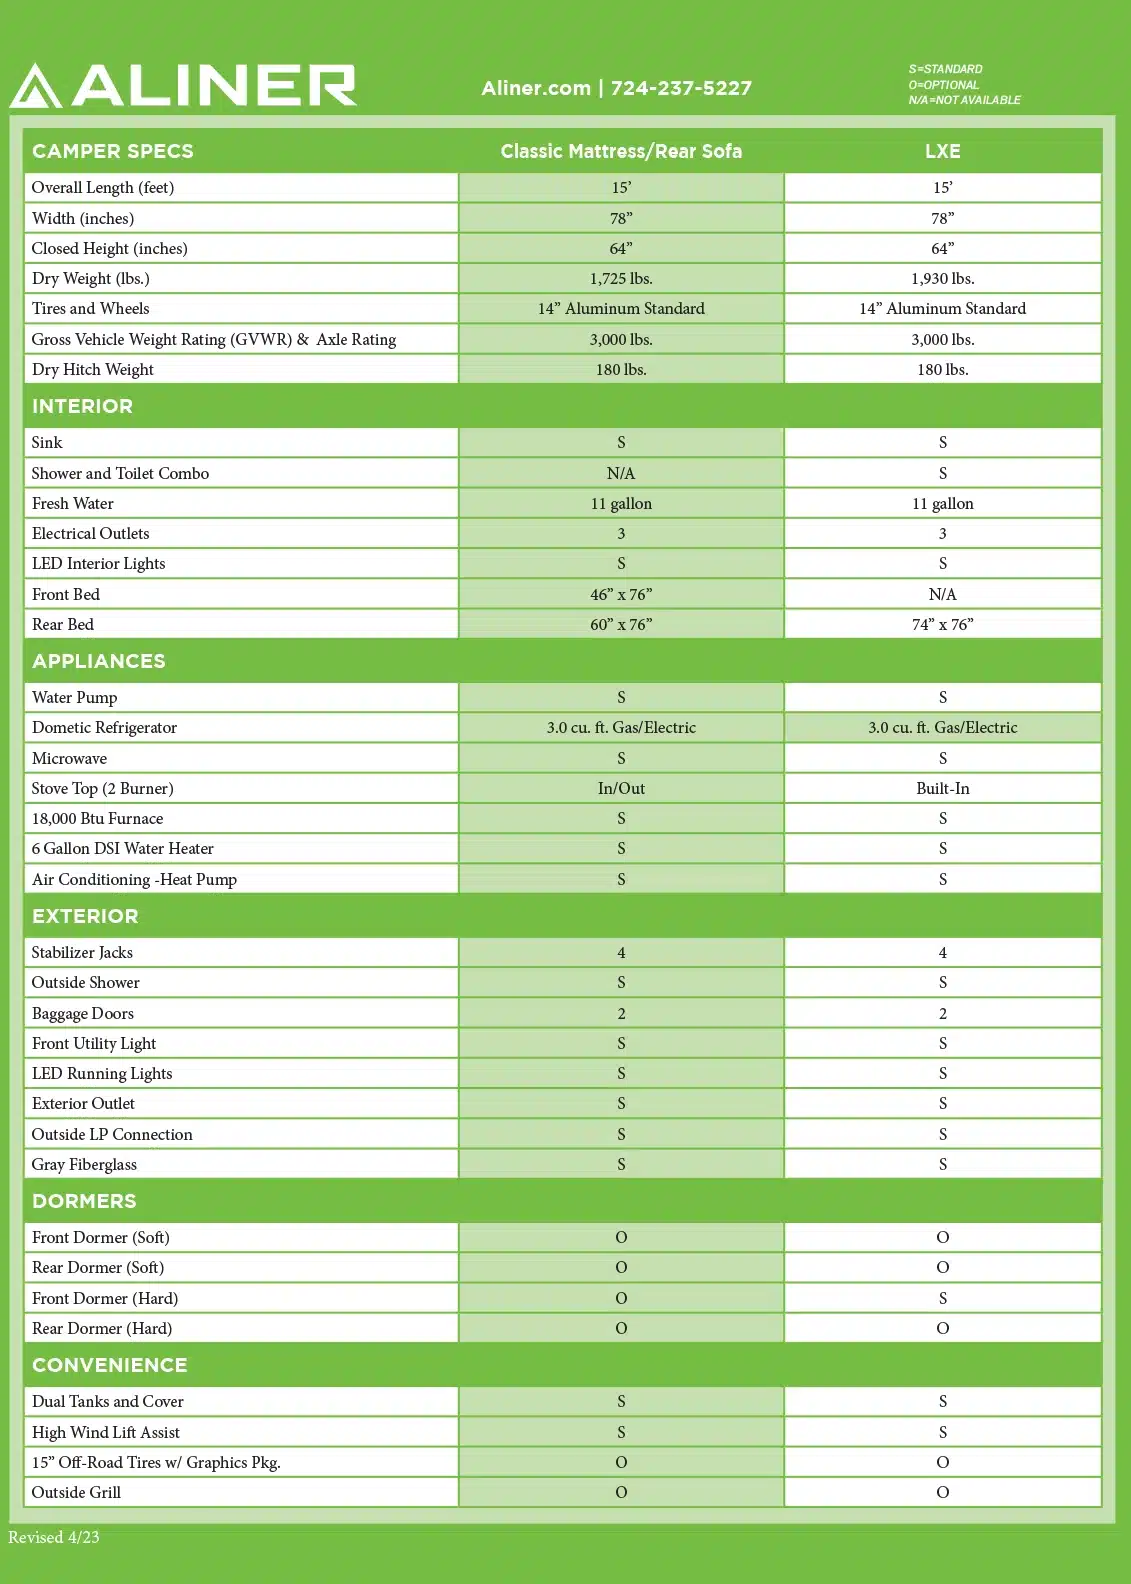 An appliance and feature comparison checklist for different camper model specifications.